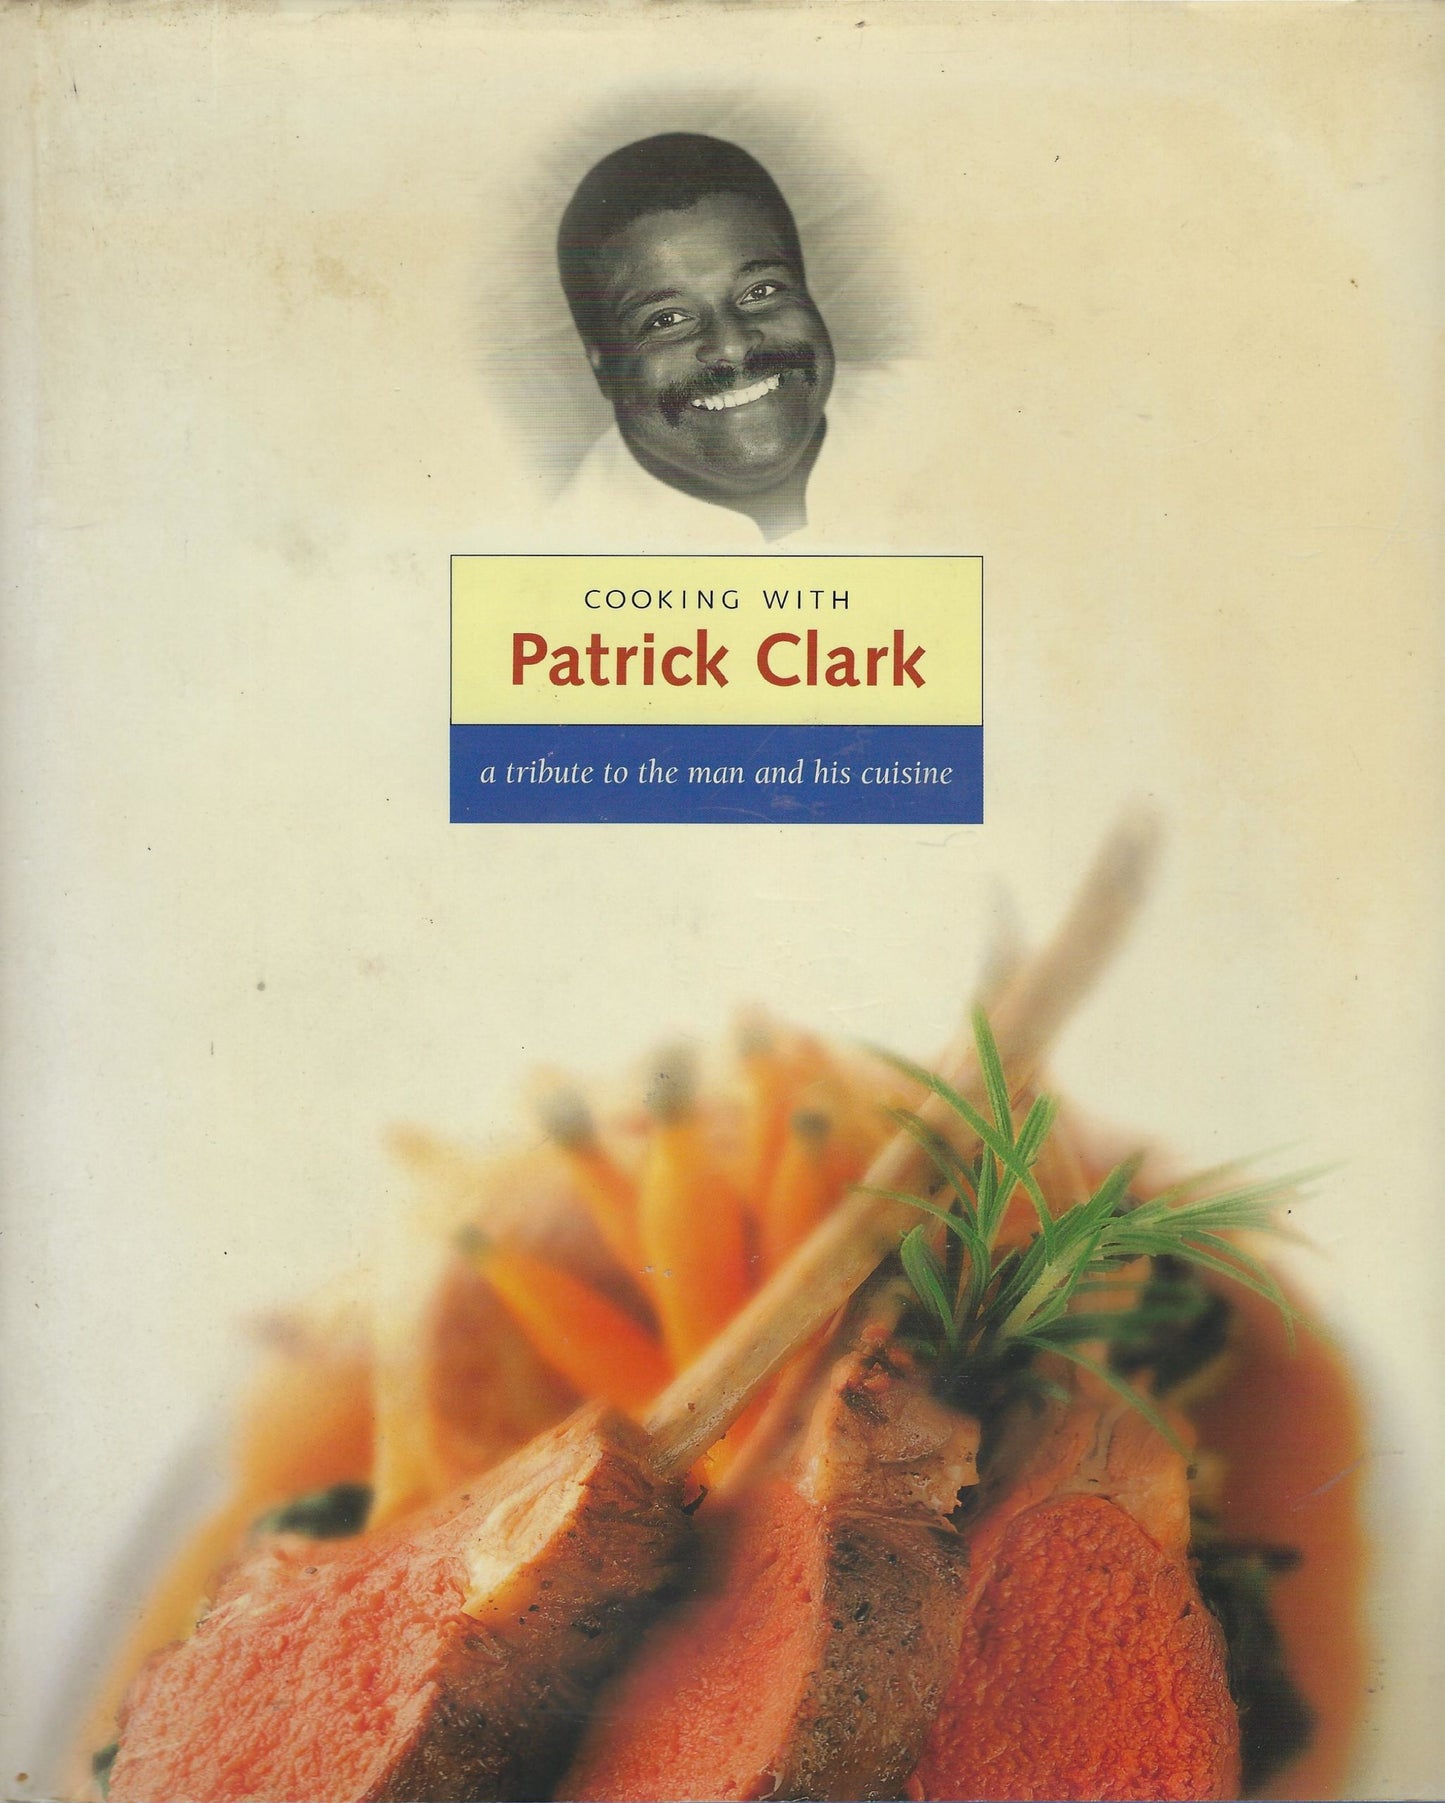 Cooking with Patrick Clark / A Tribute to the Man and His Cuisine